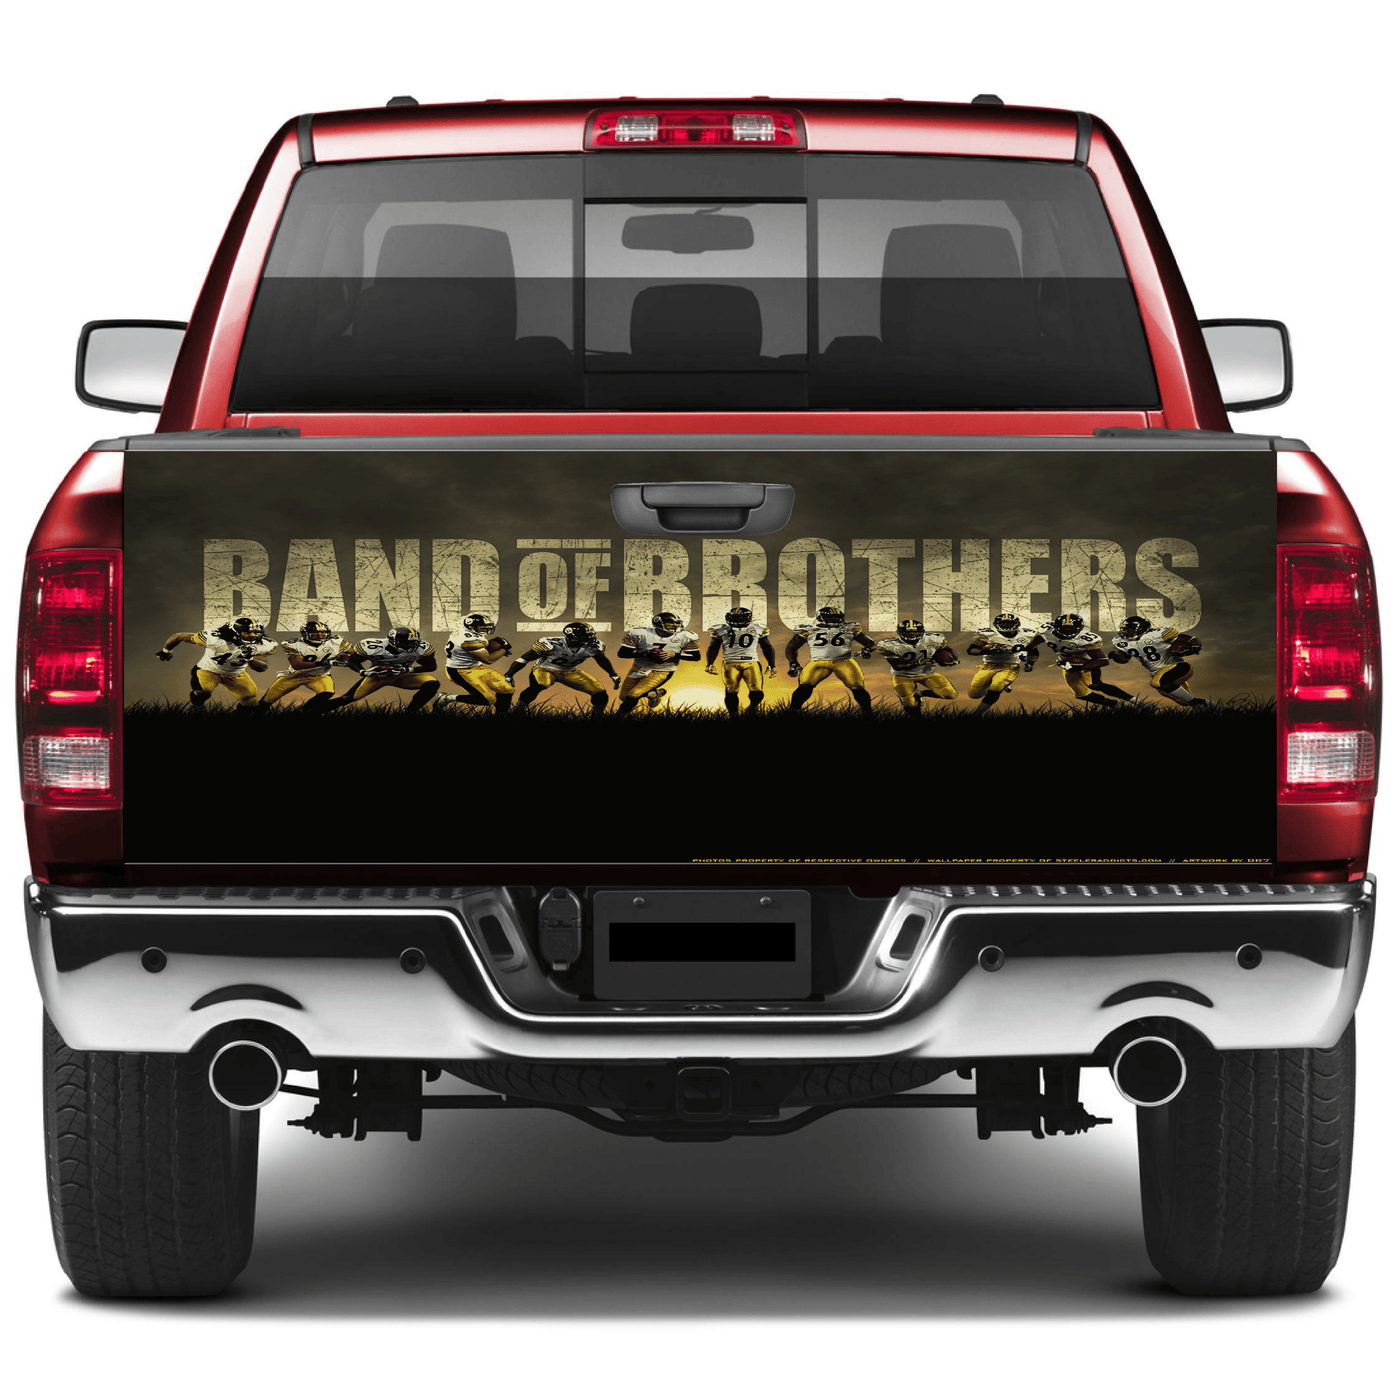 Pittsburgh Steelers Tailgate Wraps For Trucks SUV Vinyl Decals Sticker